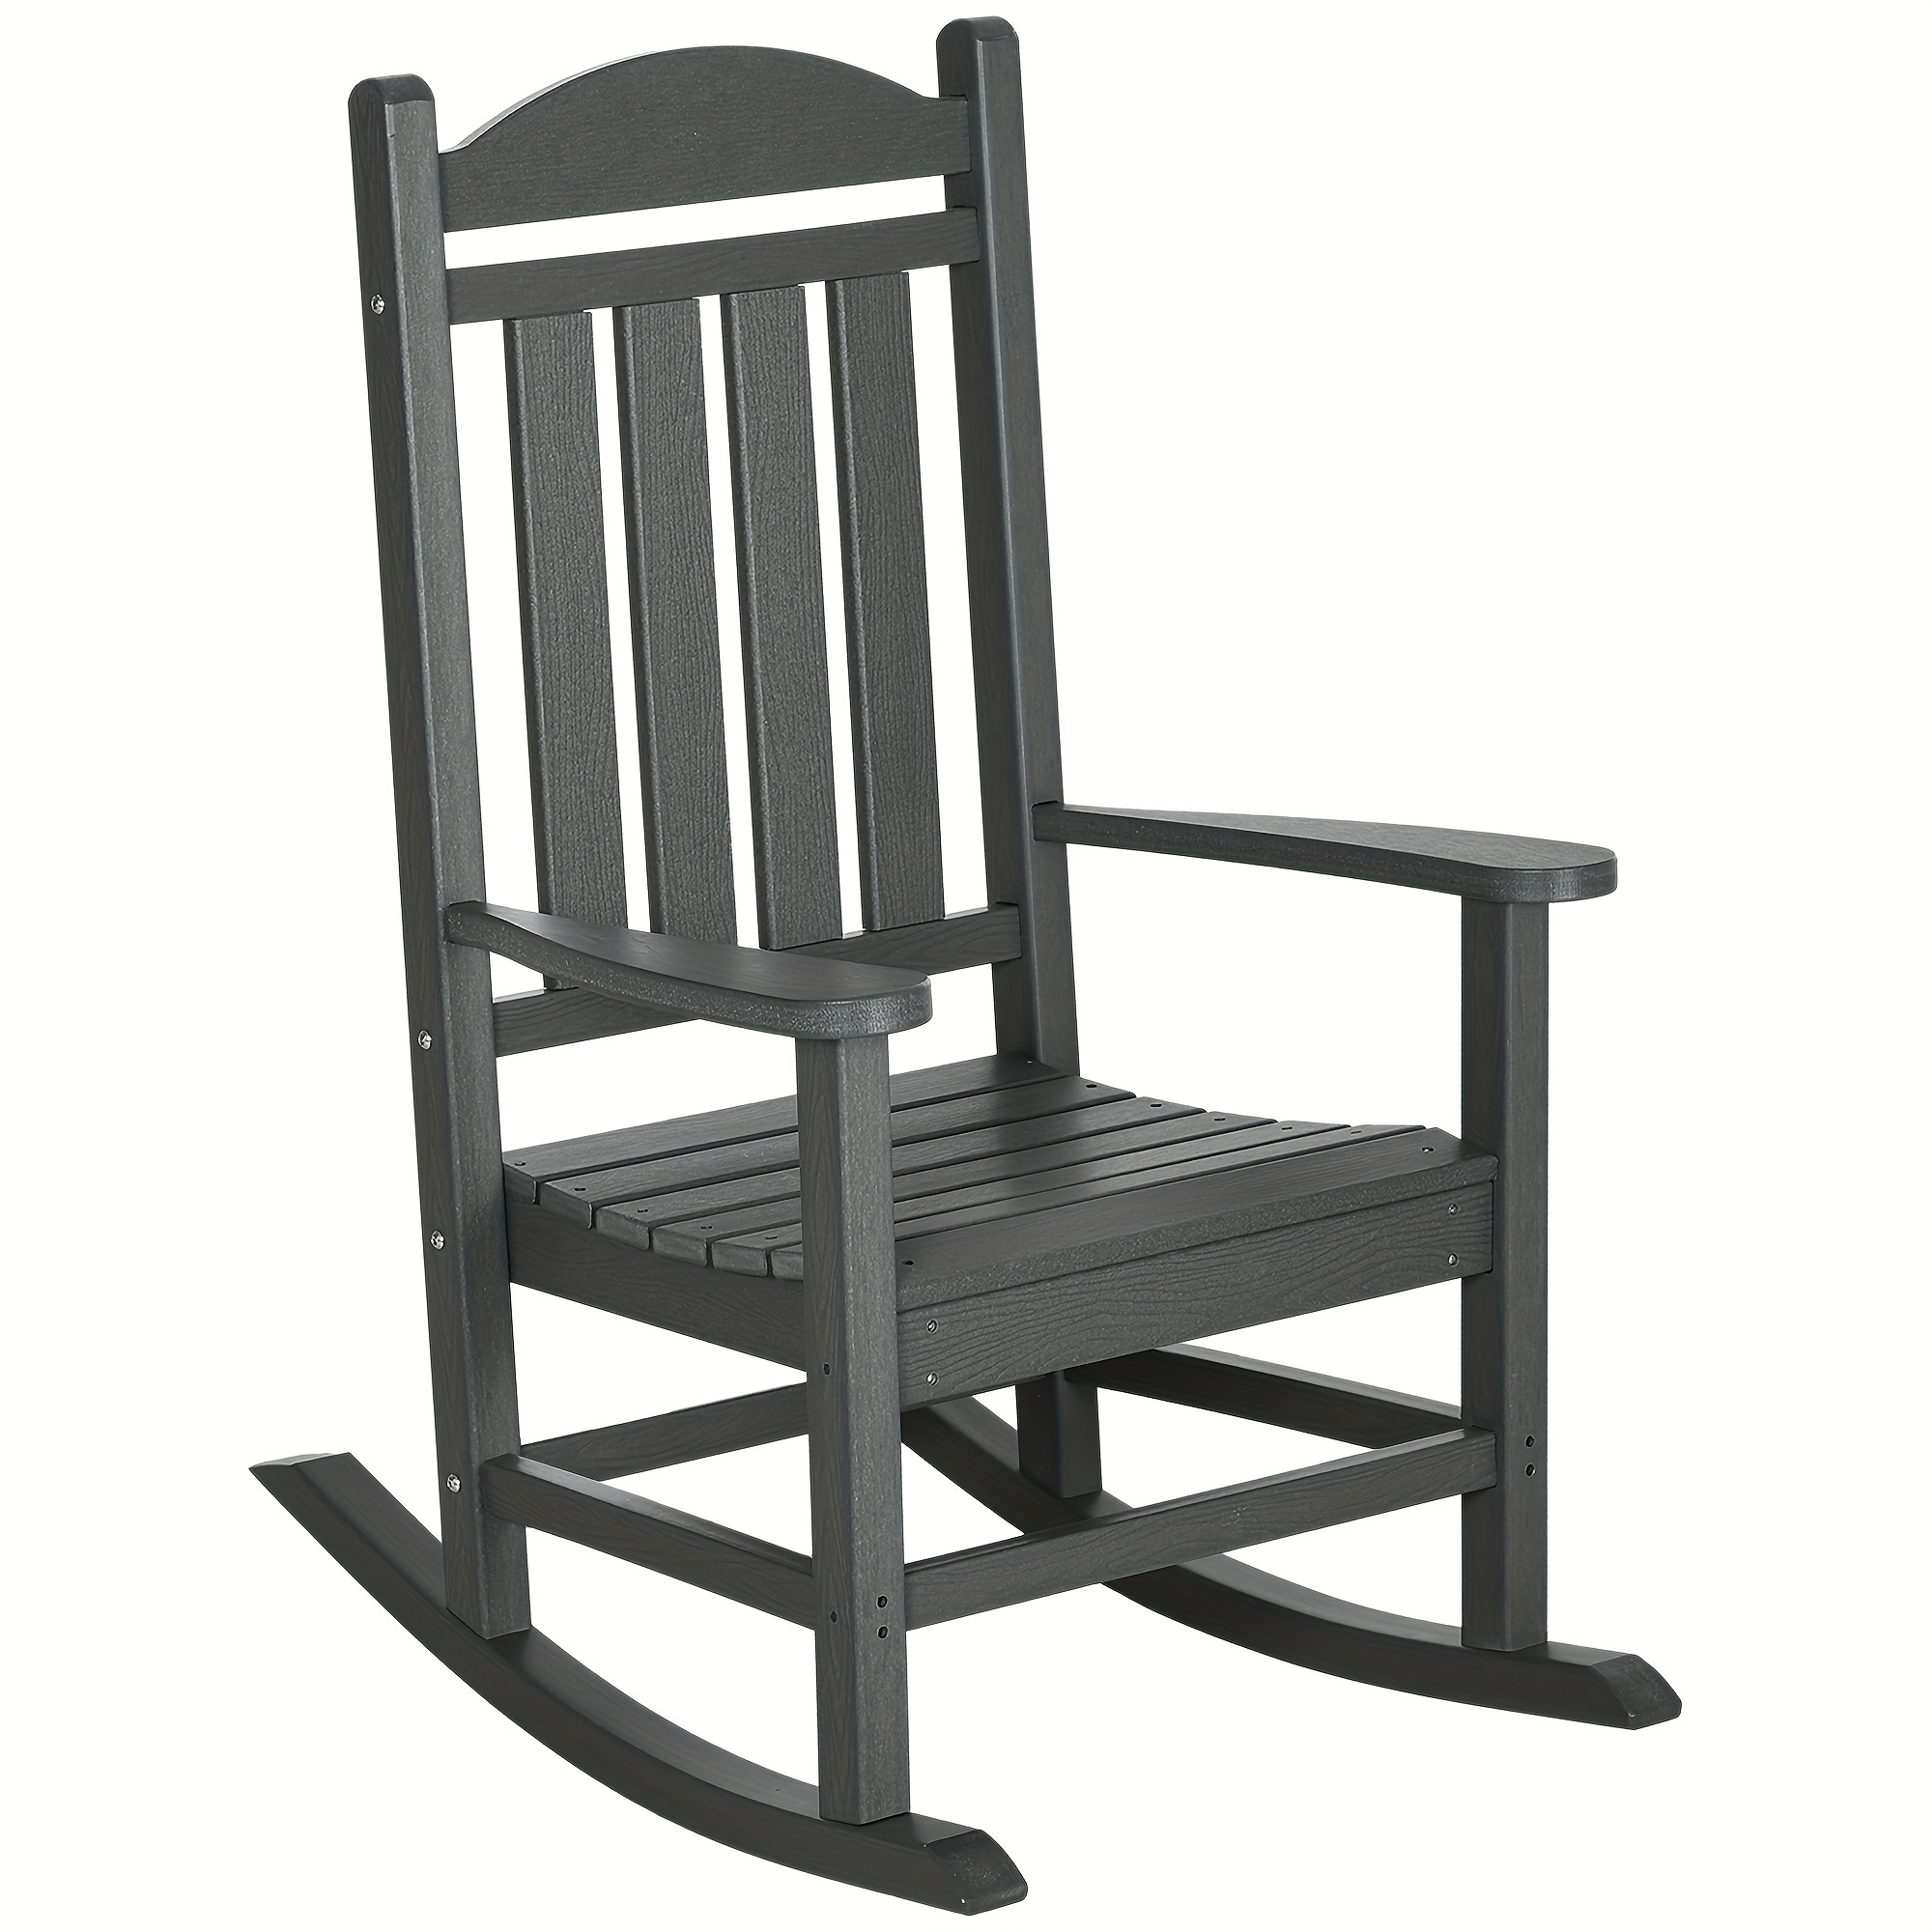 

Outsunny Outdoor Rocking Chair, All Weather-resistant Hdpe Rocking Patio Chairs With Rustic High Back, Armrests, Oversized Seat And Slatted Backrest, 350lbs Weight Capacity, Dark Gray